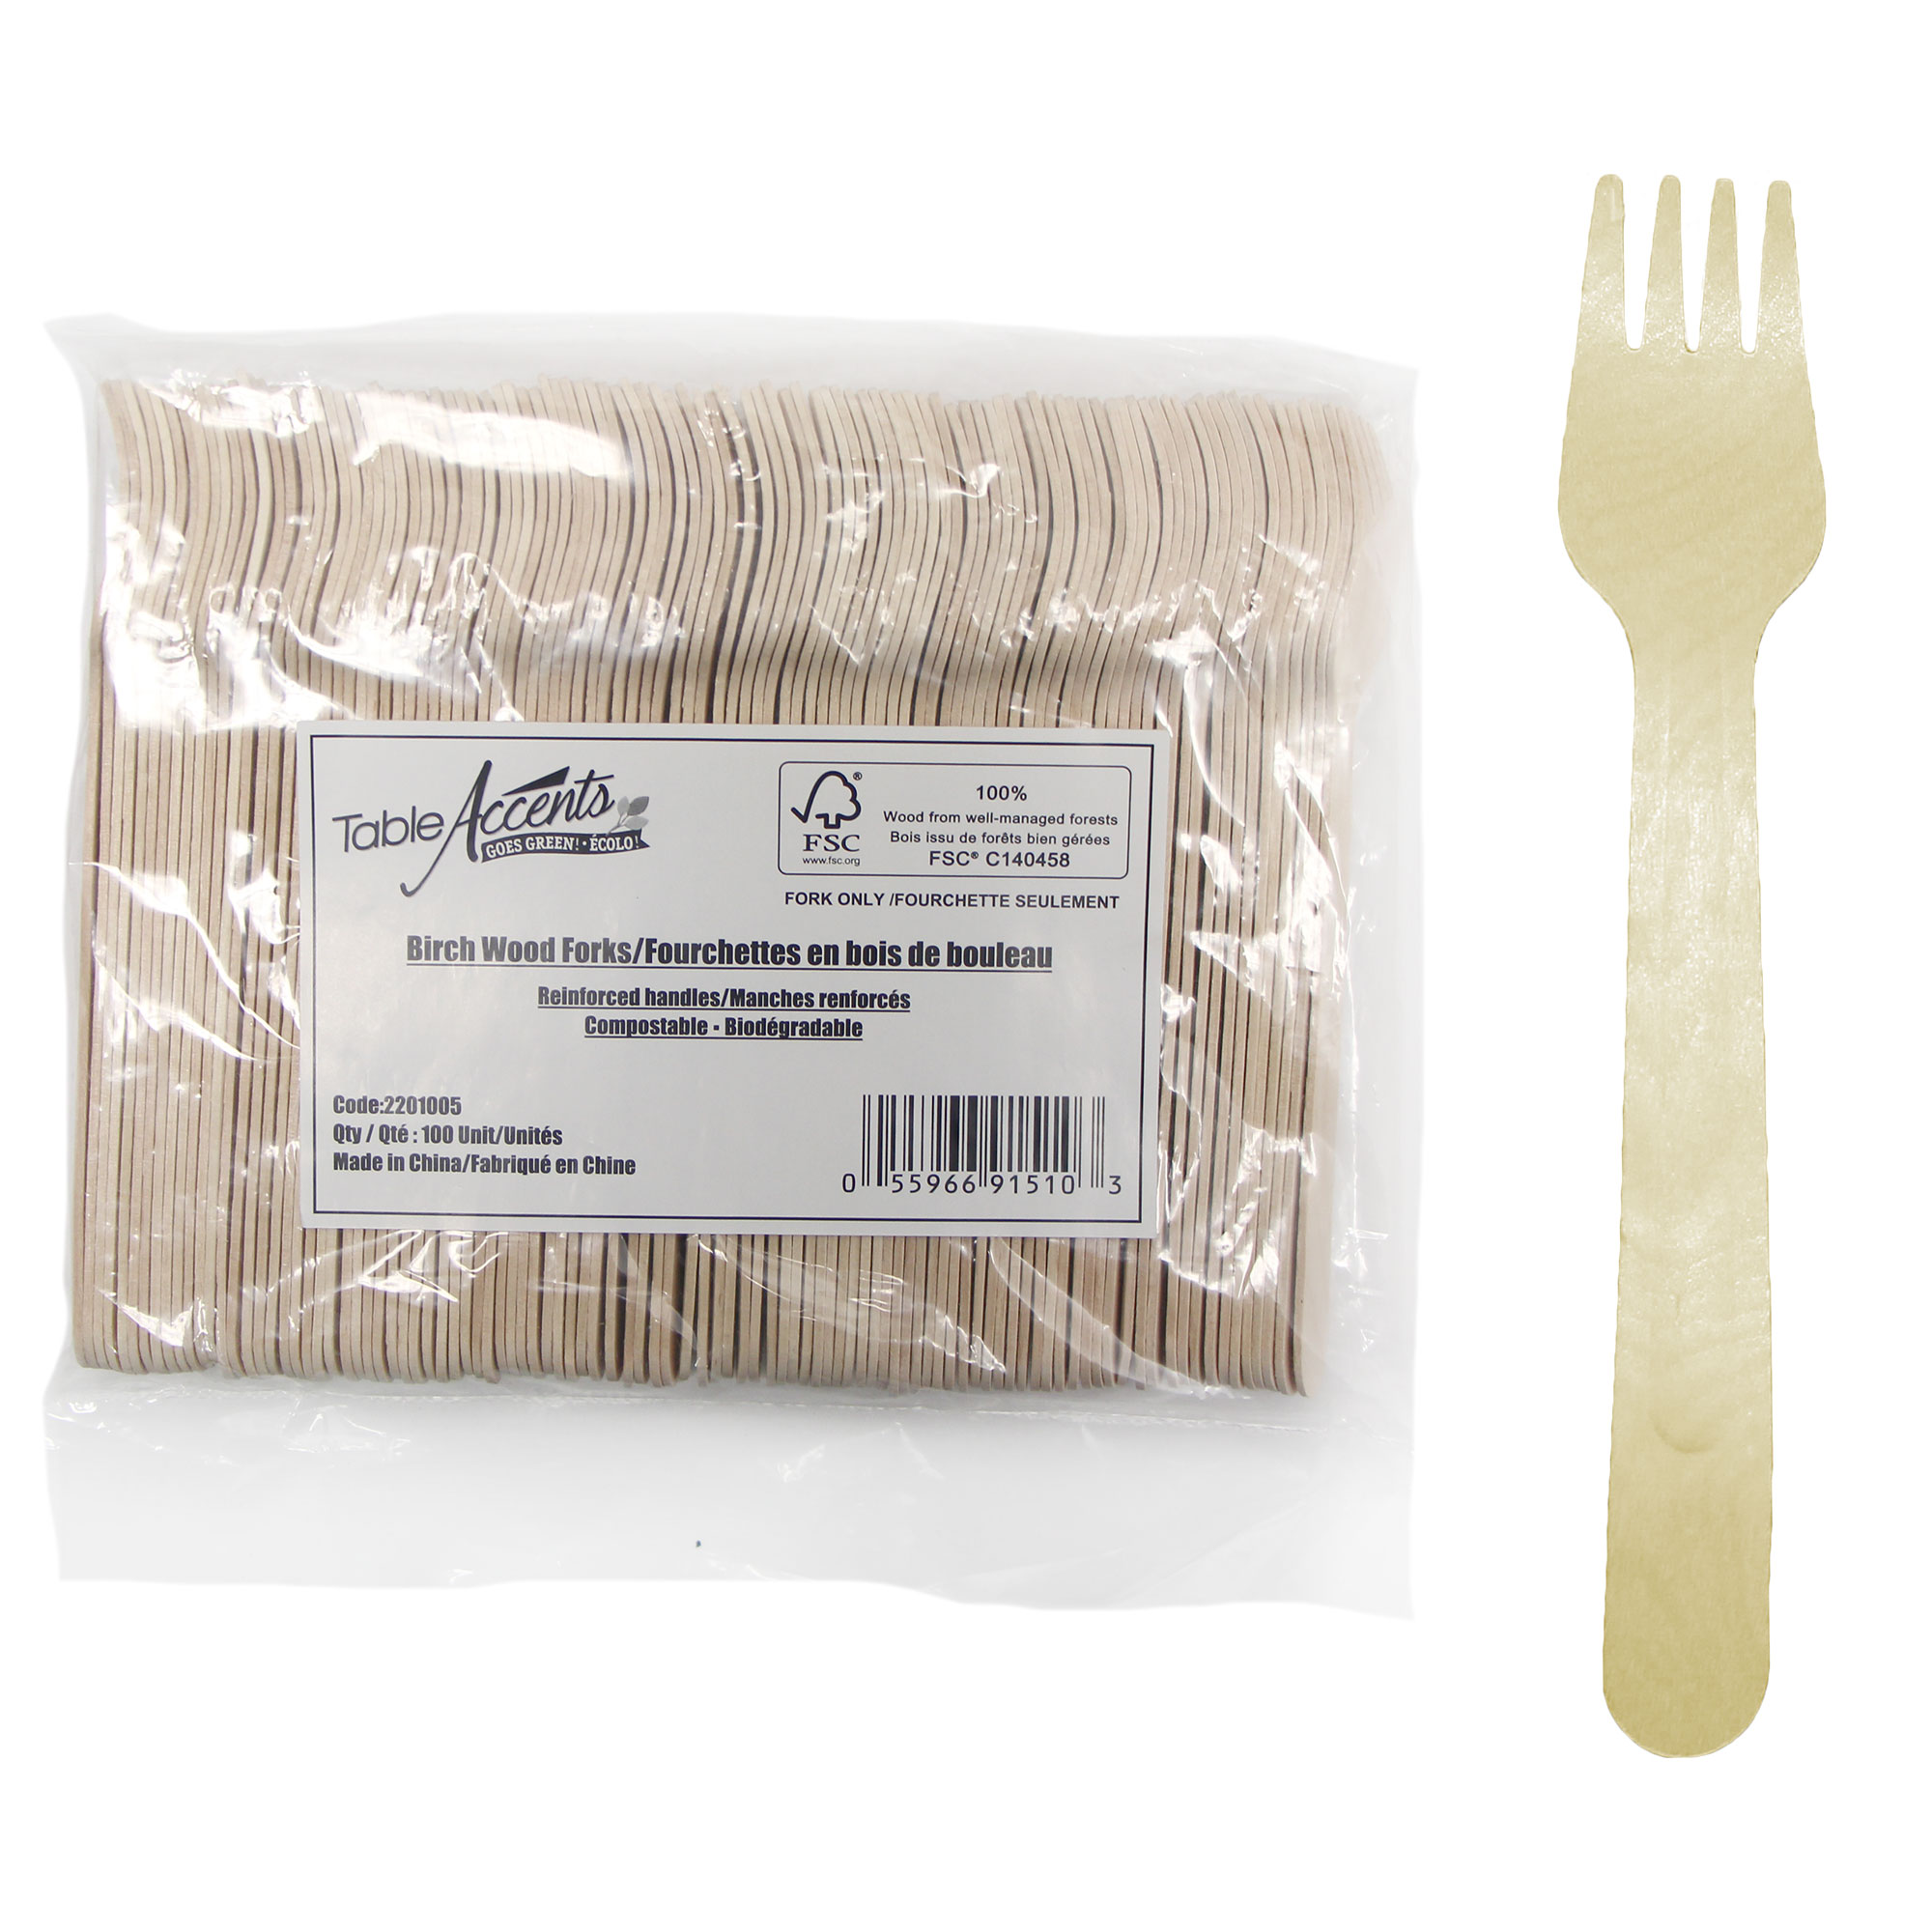 birch wood forks 10 bags /100